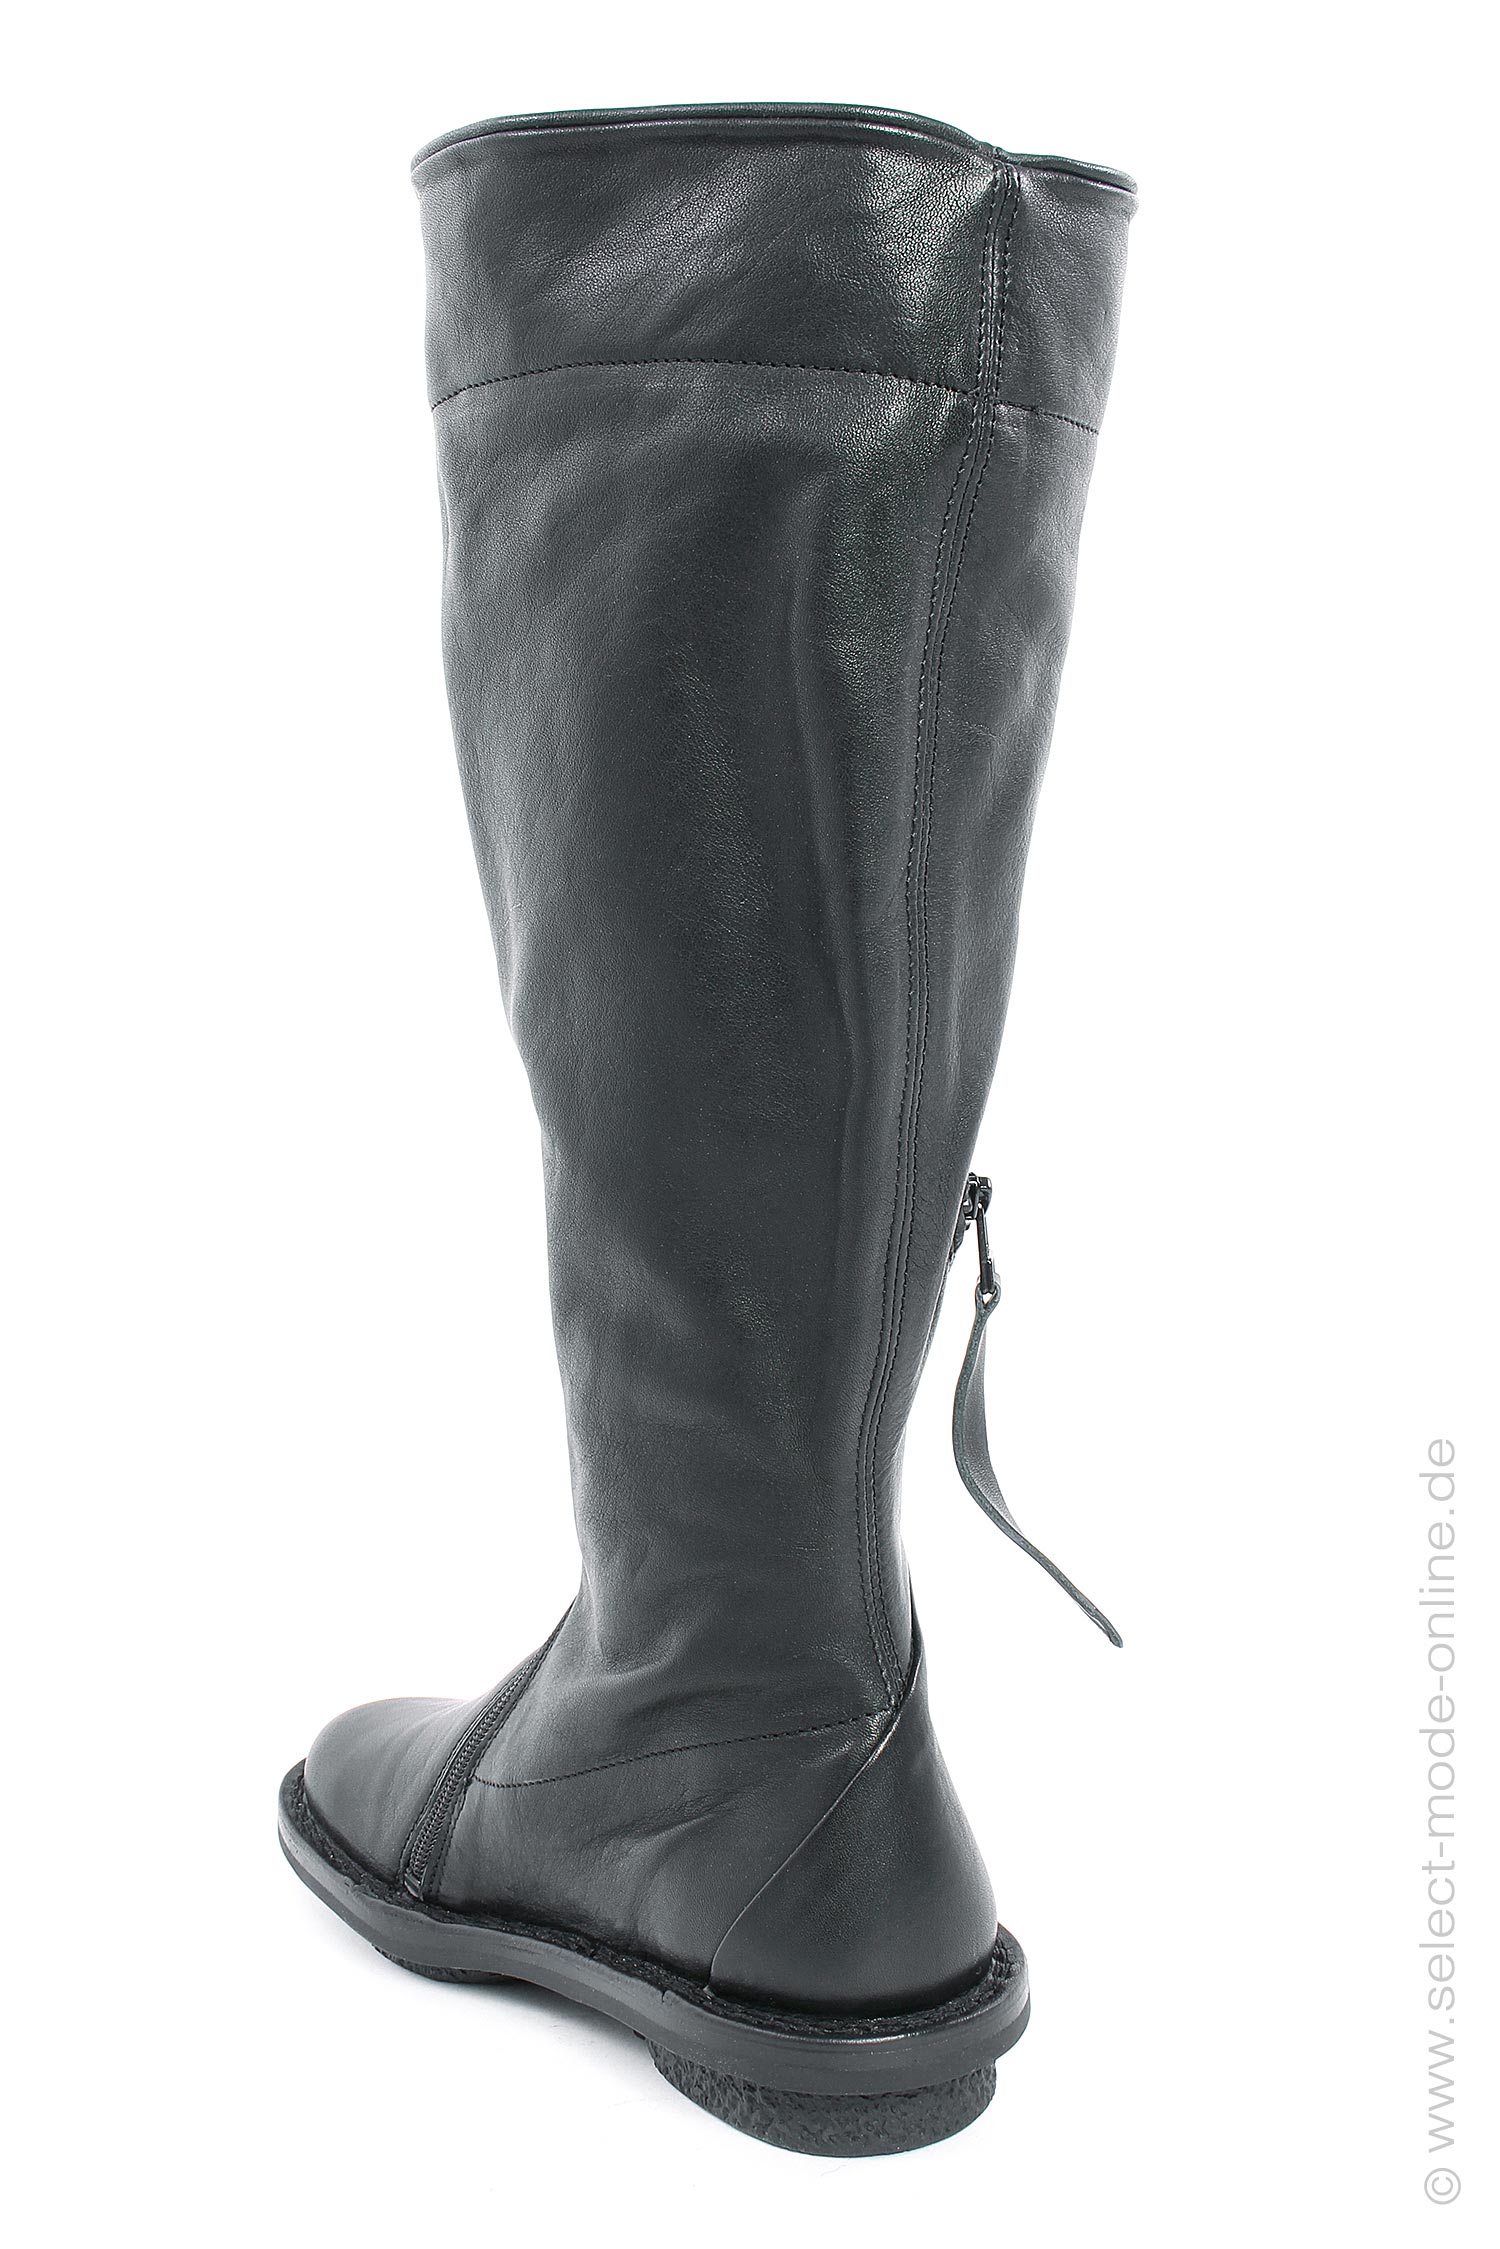 Leather boots - Black - Sphere